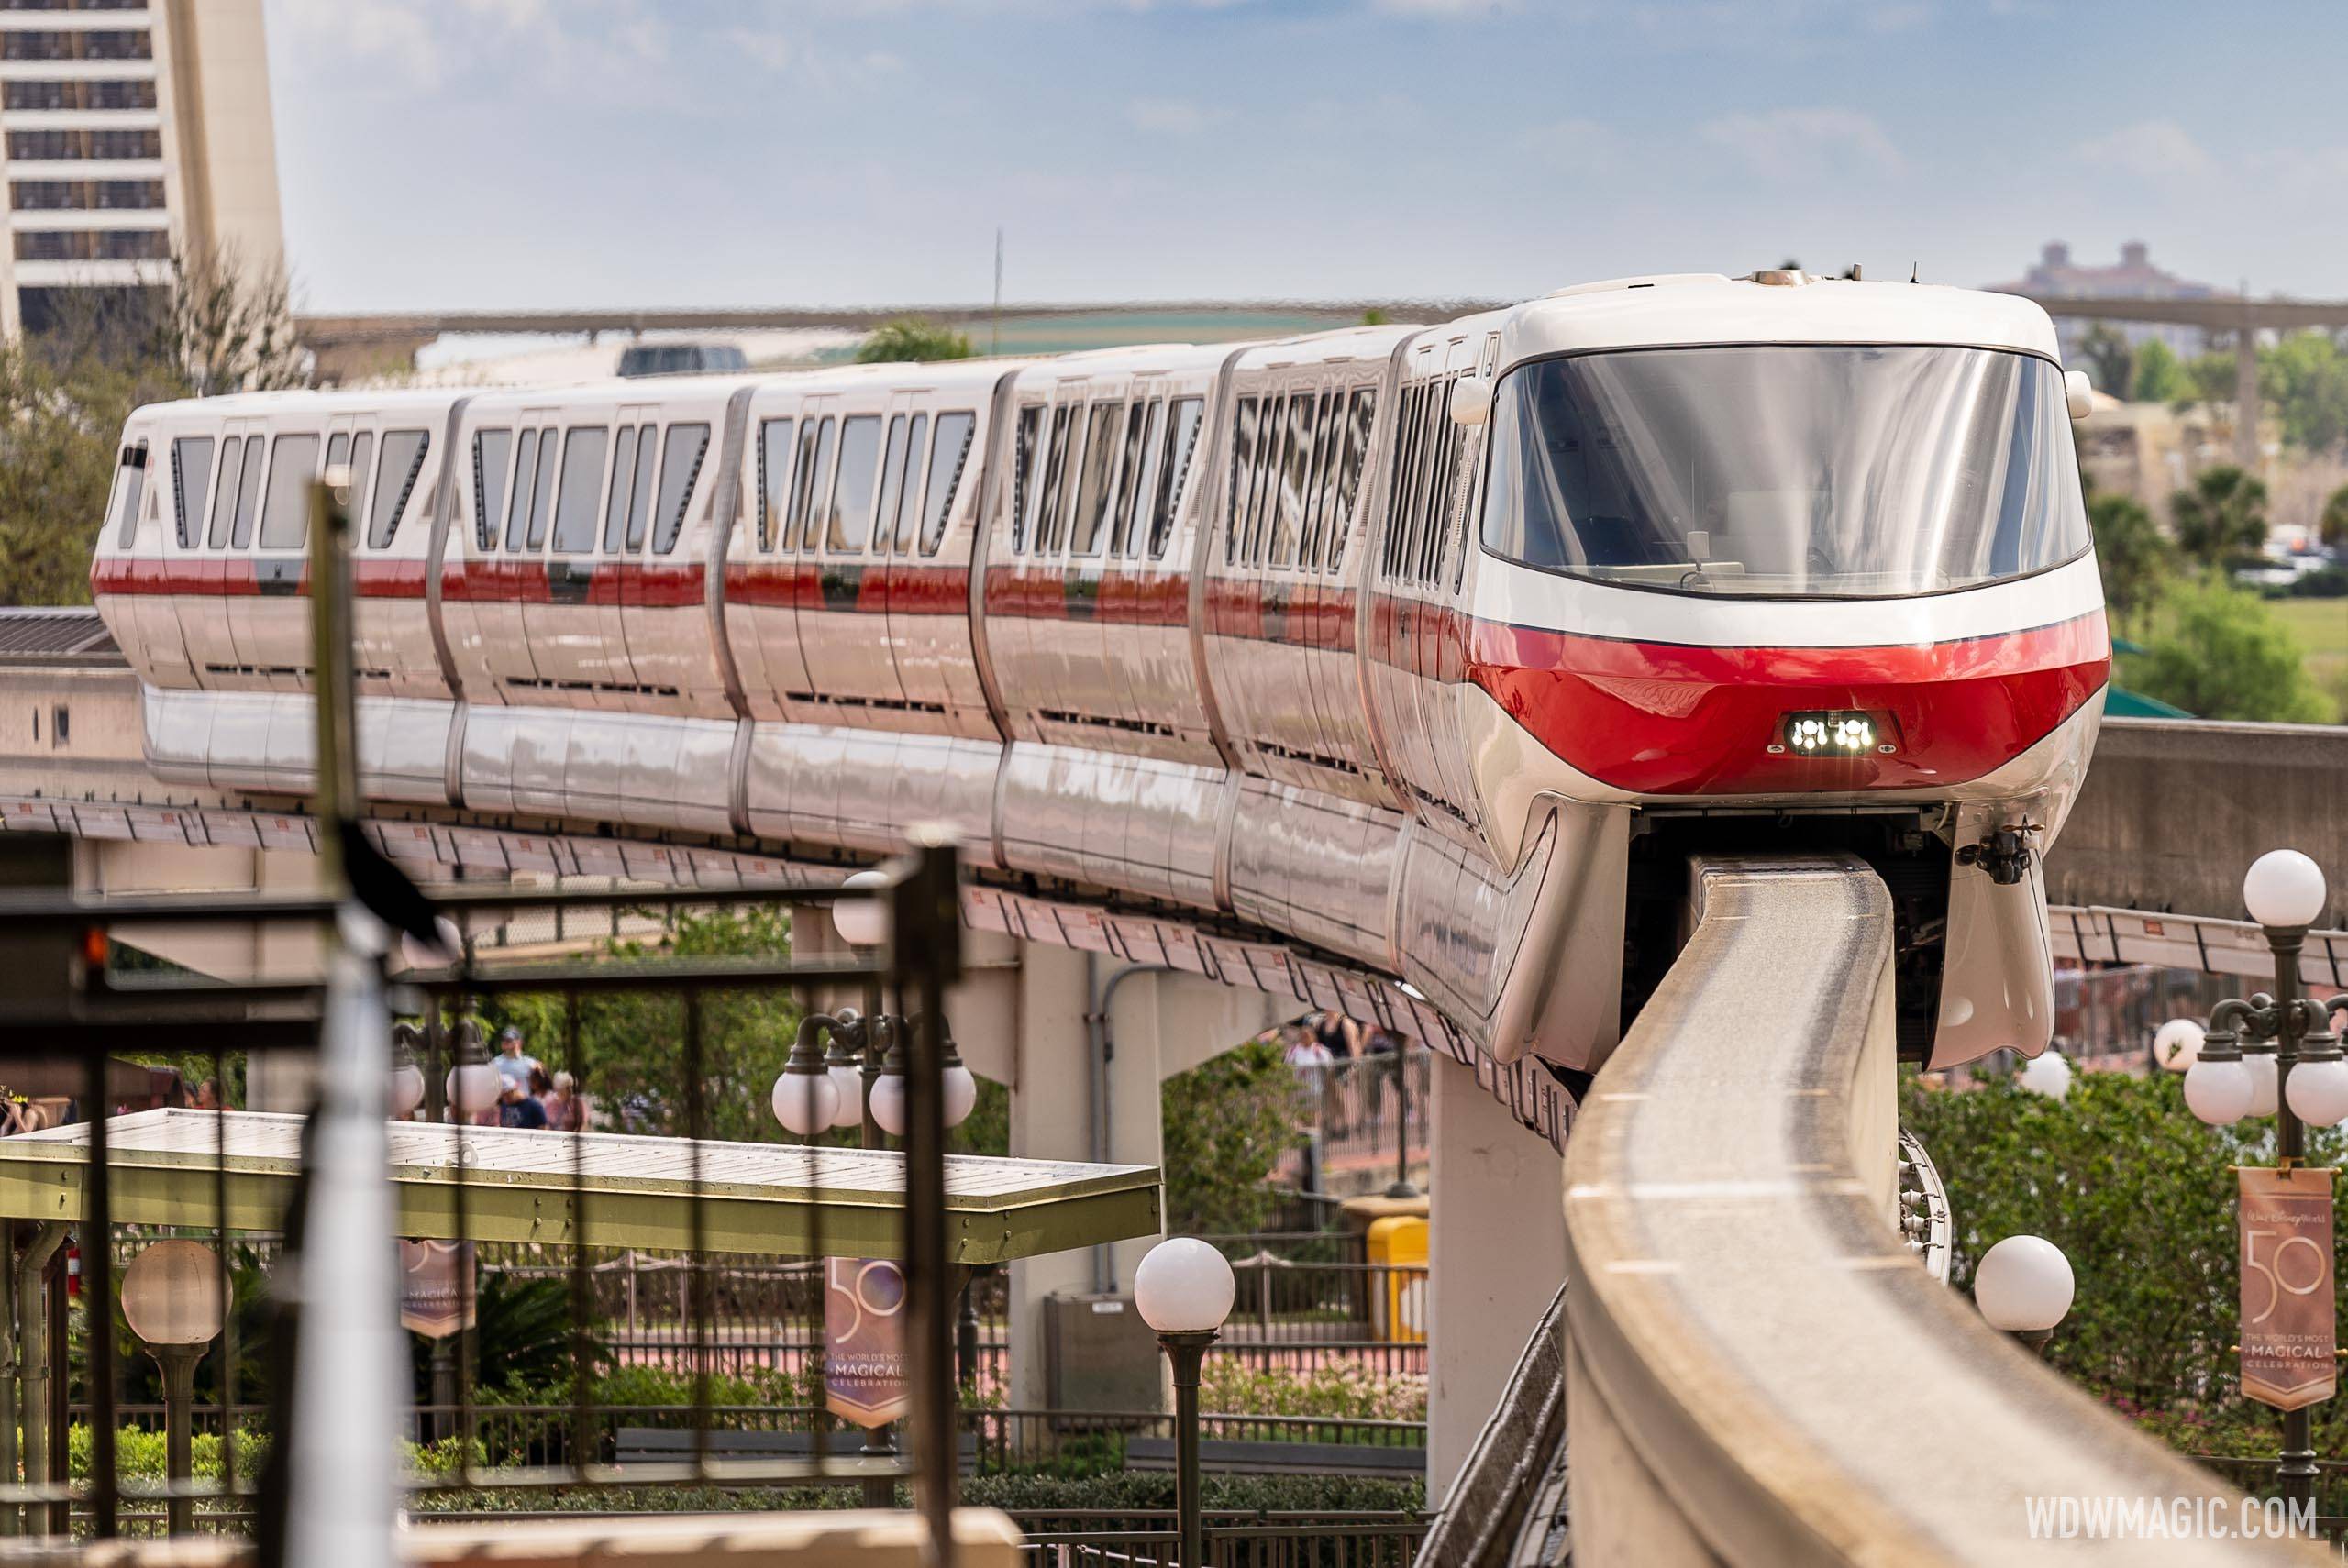 DeSantis moves to bring state safety oversight of the Walt Disney World Monorail including suspending the service for inspections